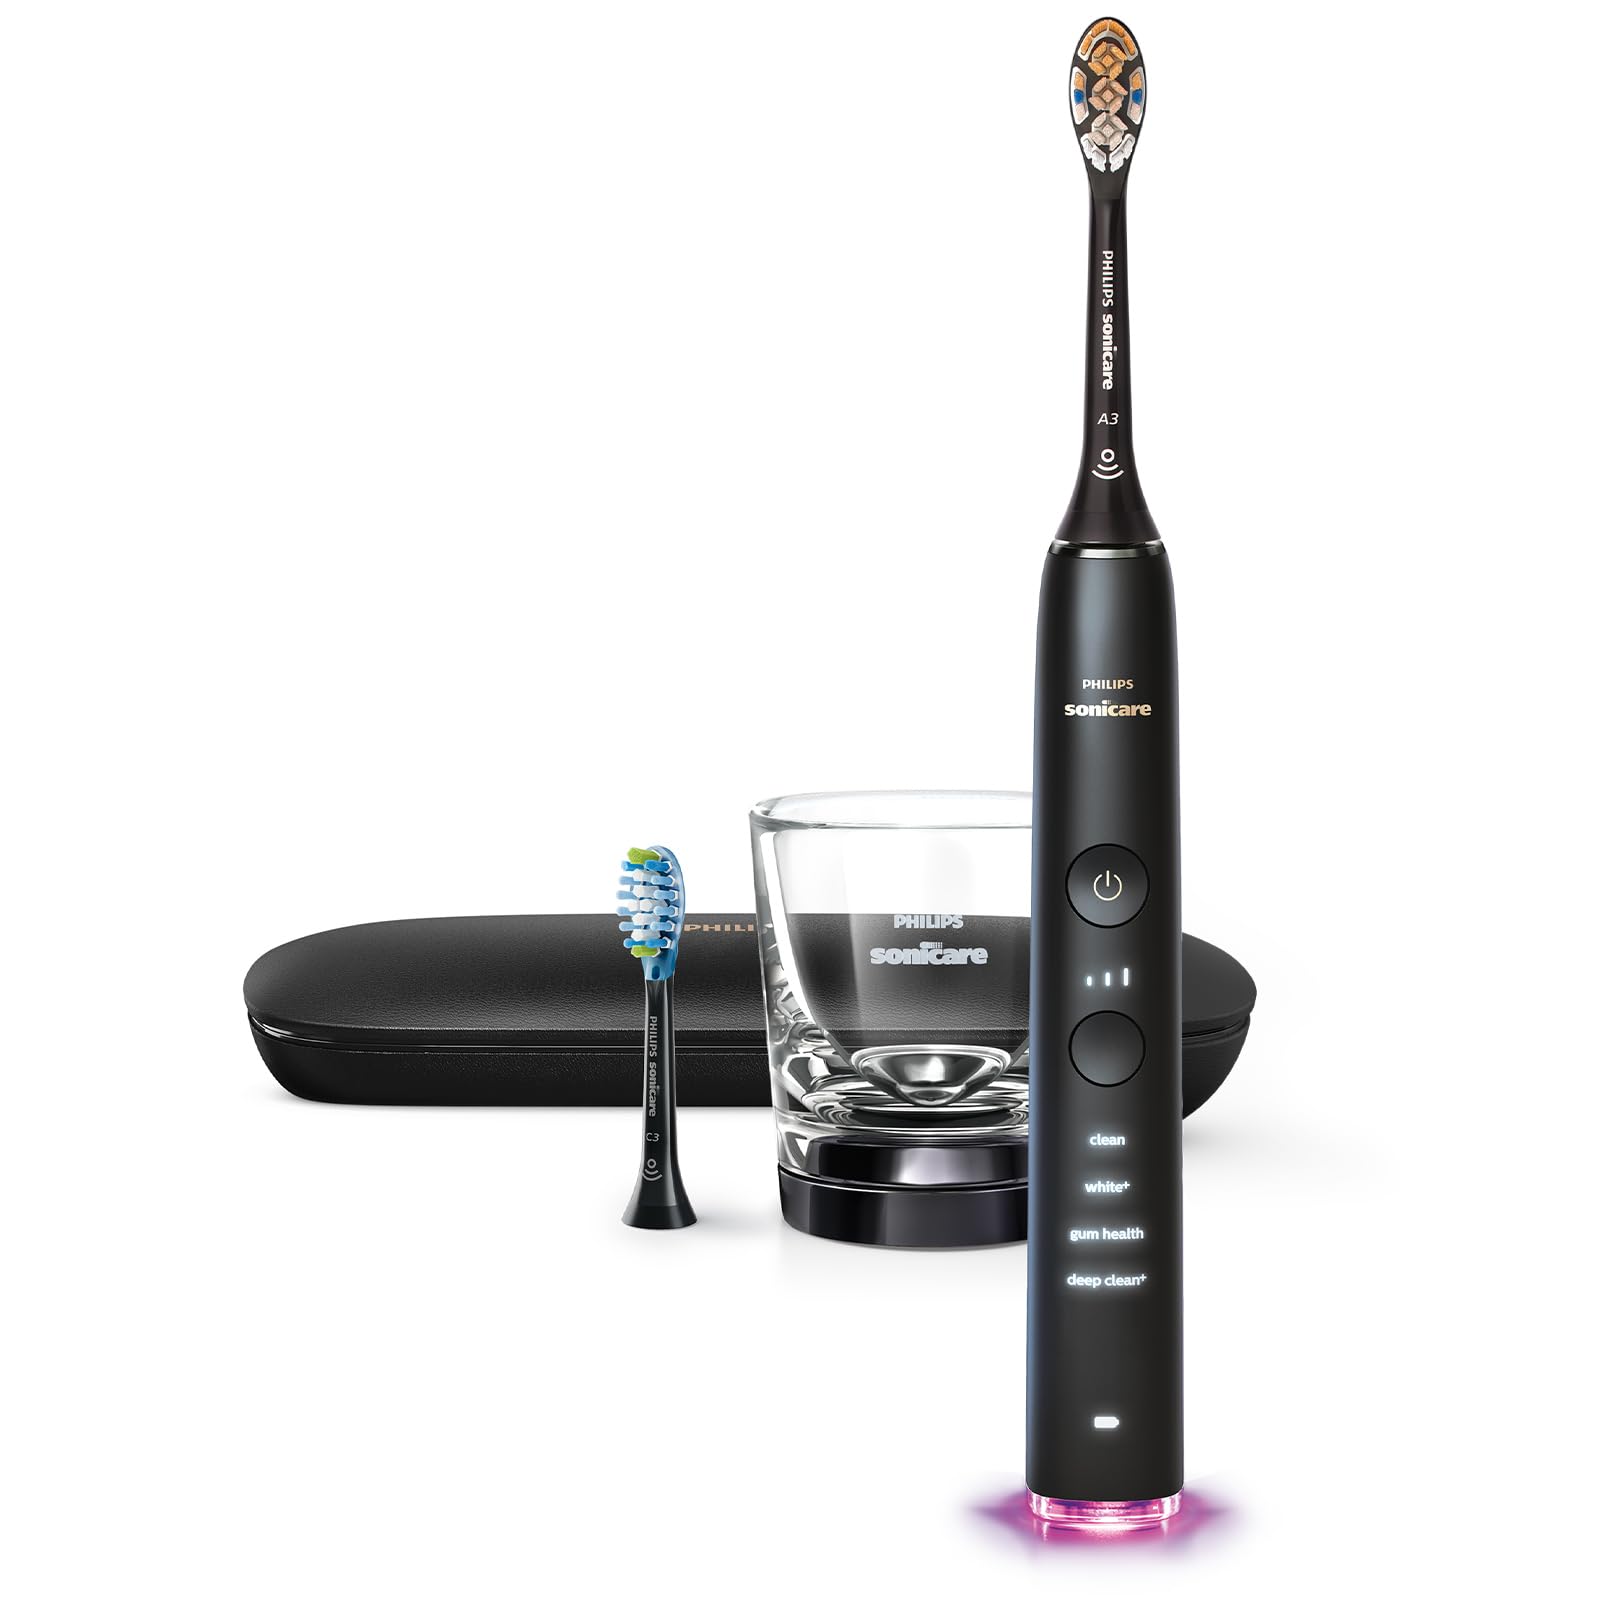 Philips Sonicare DiamondClean Smart Electric, Rechargeable Toothbrush for Complete Oral Care – 9300 Series, Black, HX9903/15